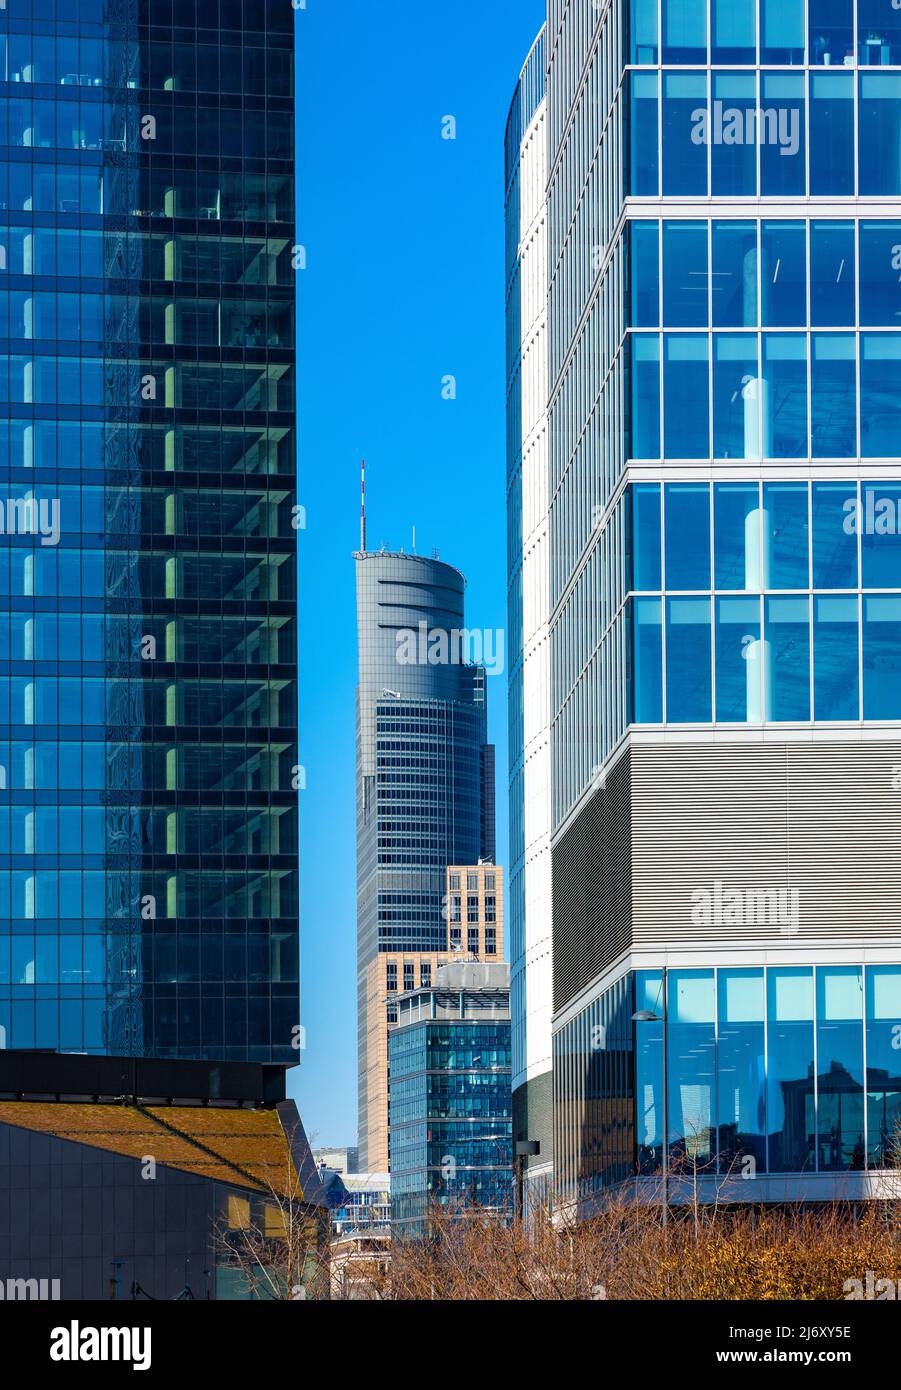 Warsaw, Poland - March 18, 2022: Warsaw Trade Tower between Skyliner Tower and Warsaw Hub in Wola business district of Warsaw city center Stock Photo